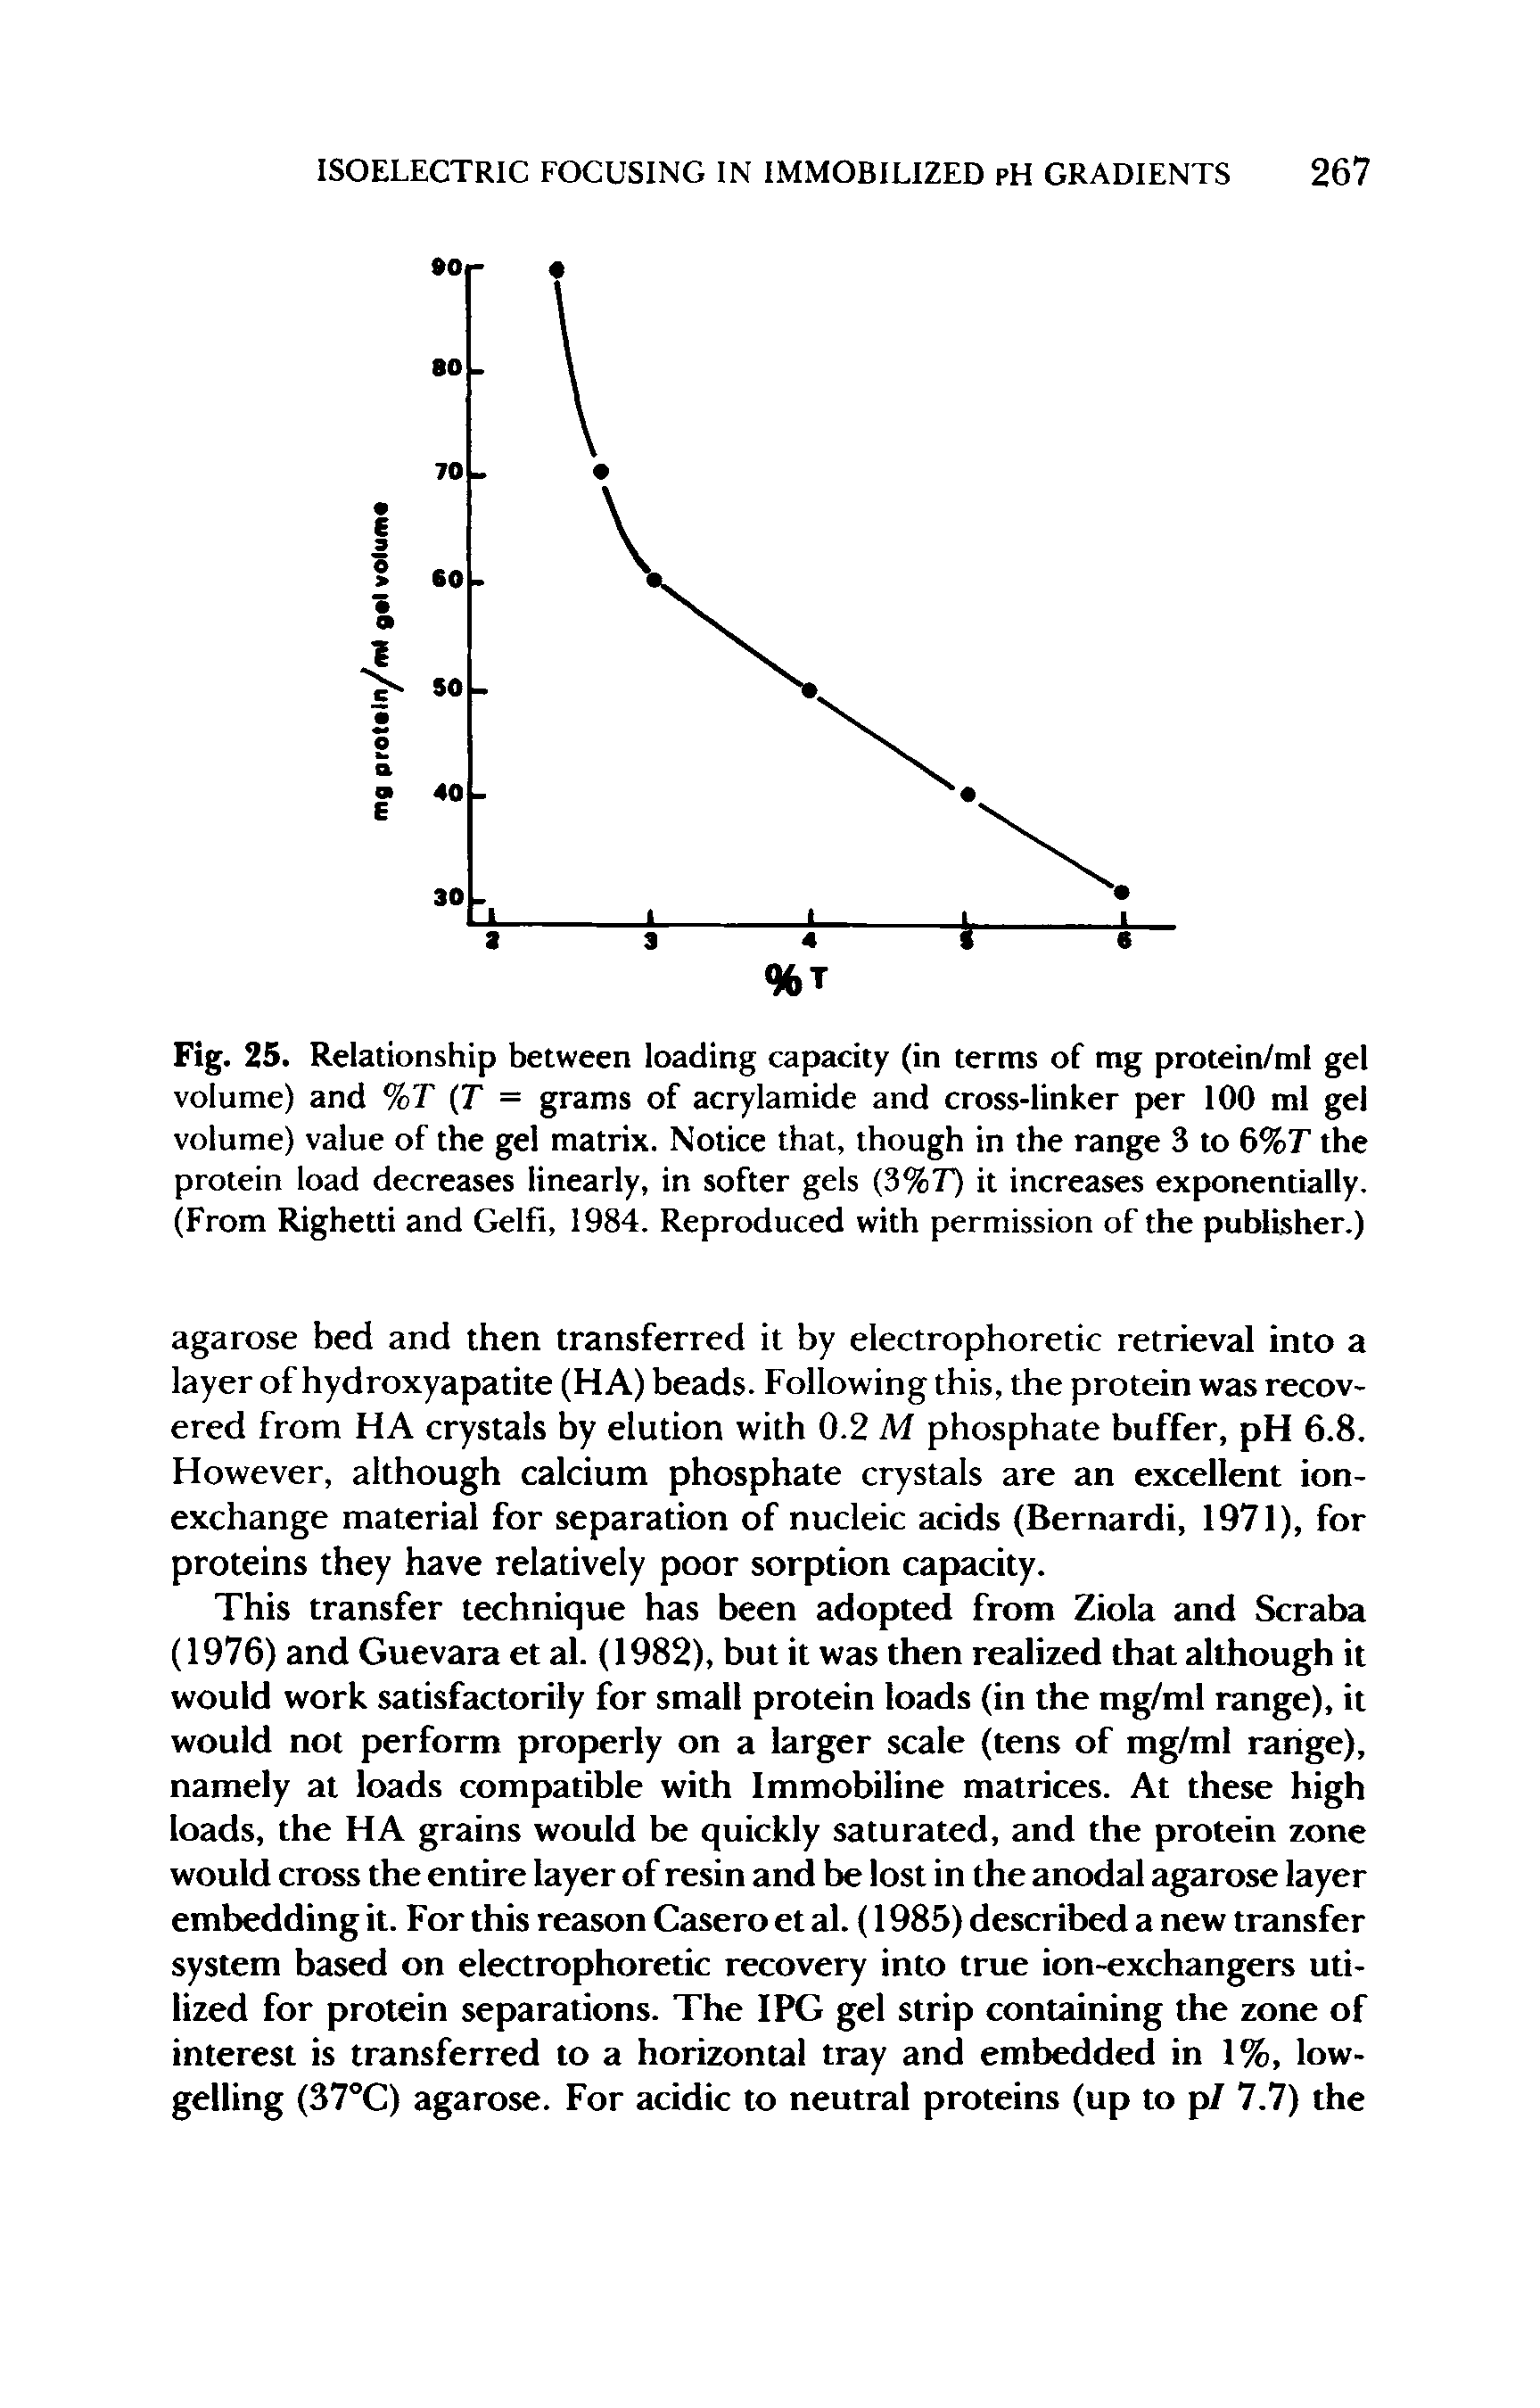 Fig. 25. Relationship between loading capacity (in terms of mg protein/ml gel volume) and %T T = grams of acrylamide and cross-linker per 100 ml gel volume) value of the gel matrix. Notice that, though in the range 3 to 6%7 the protein load decreases linearly, in softer gels (3%T) it increases exponentially. (From Righetti and Gelfi, 1984. Reproduced with permission of the publisher.)...